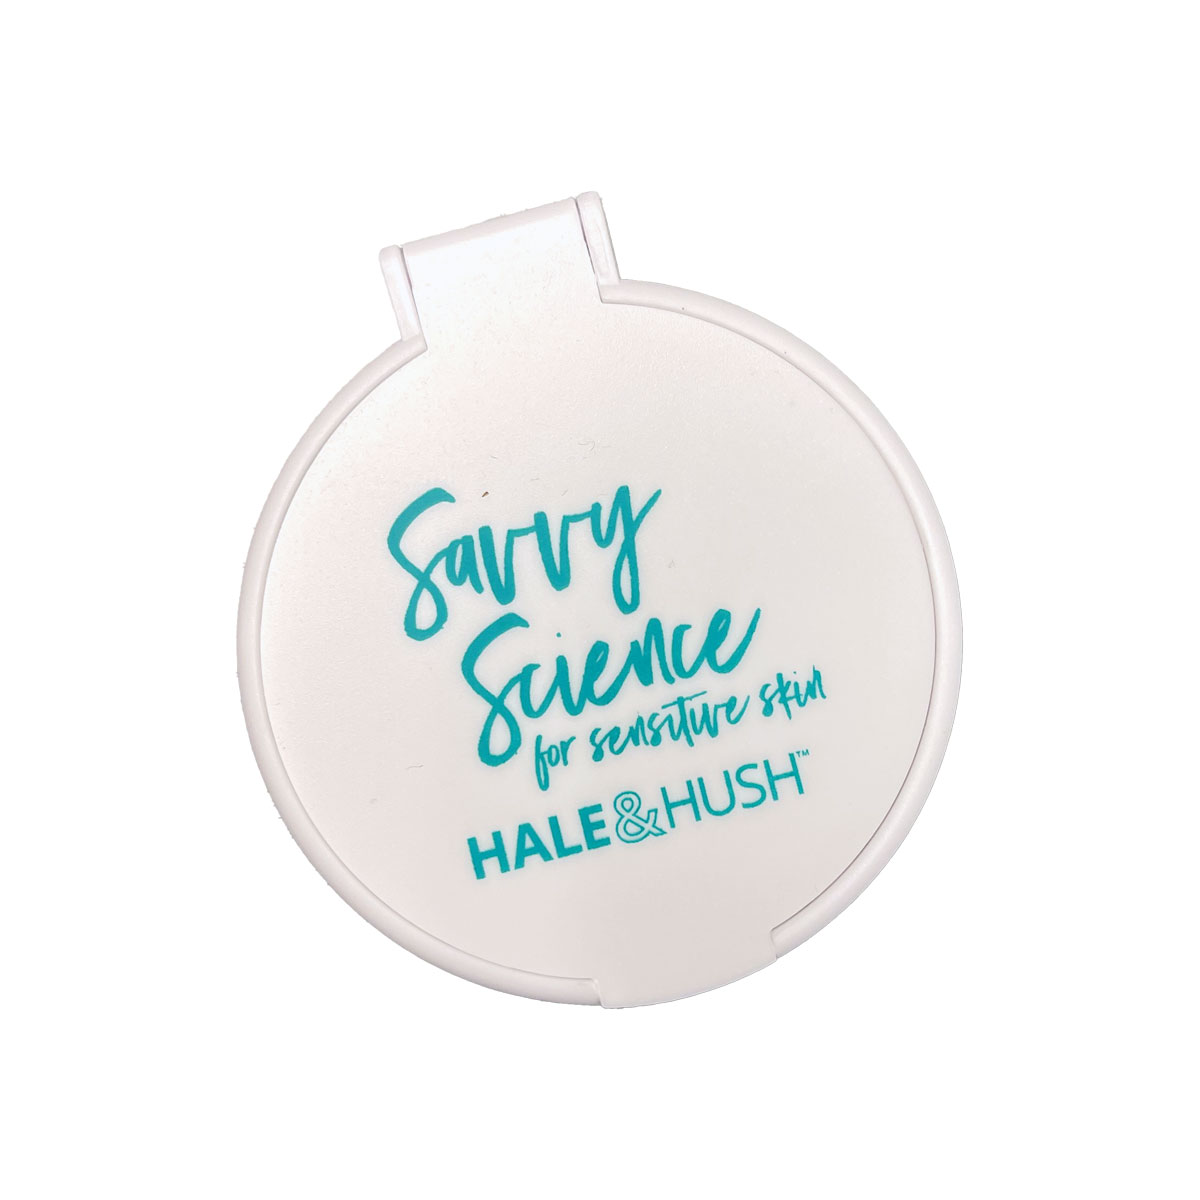 WHITE COMPACT MIRROR with LOGO